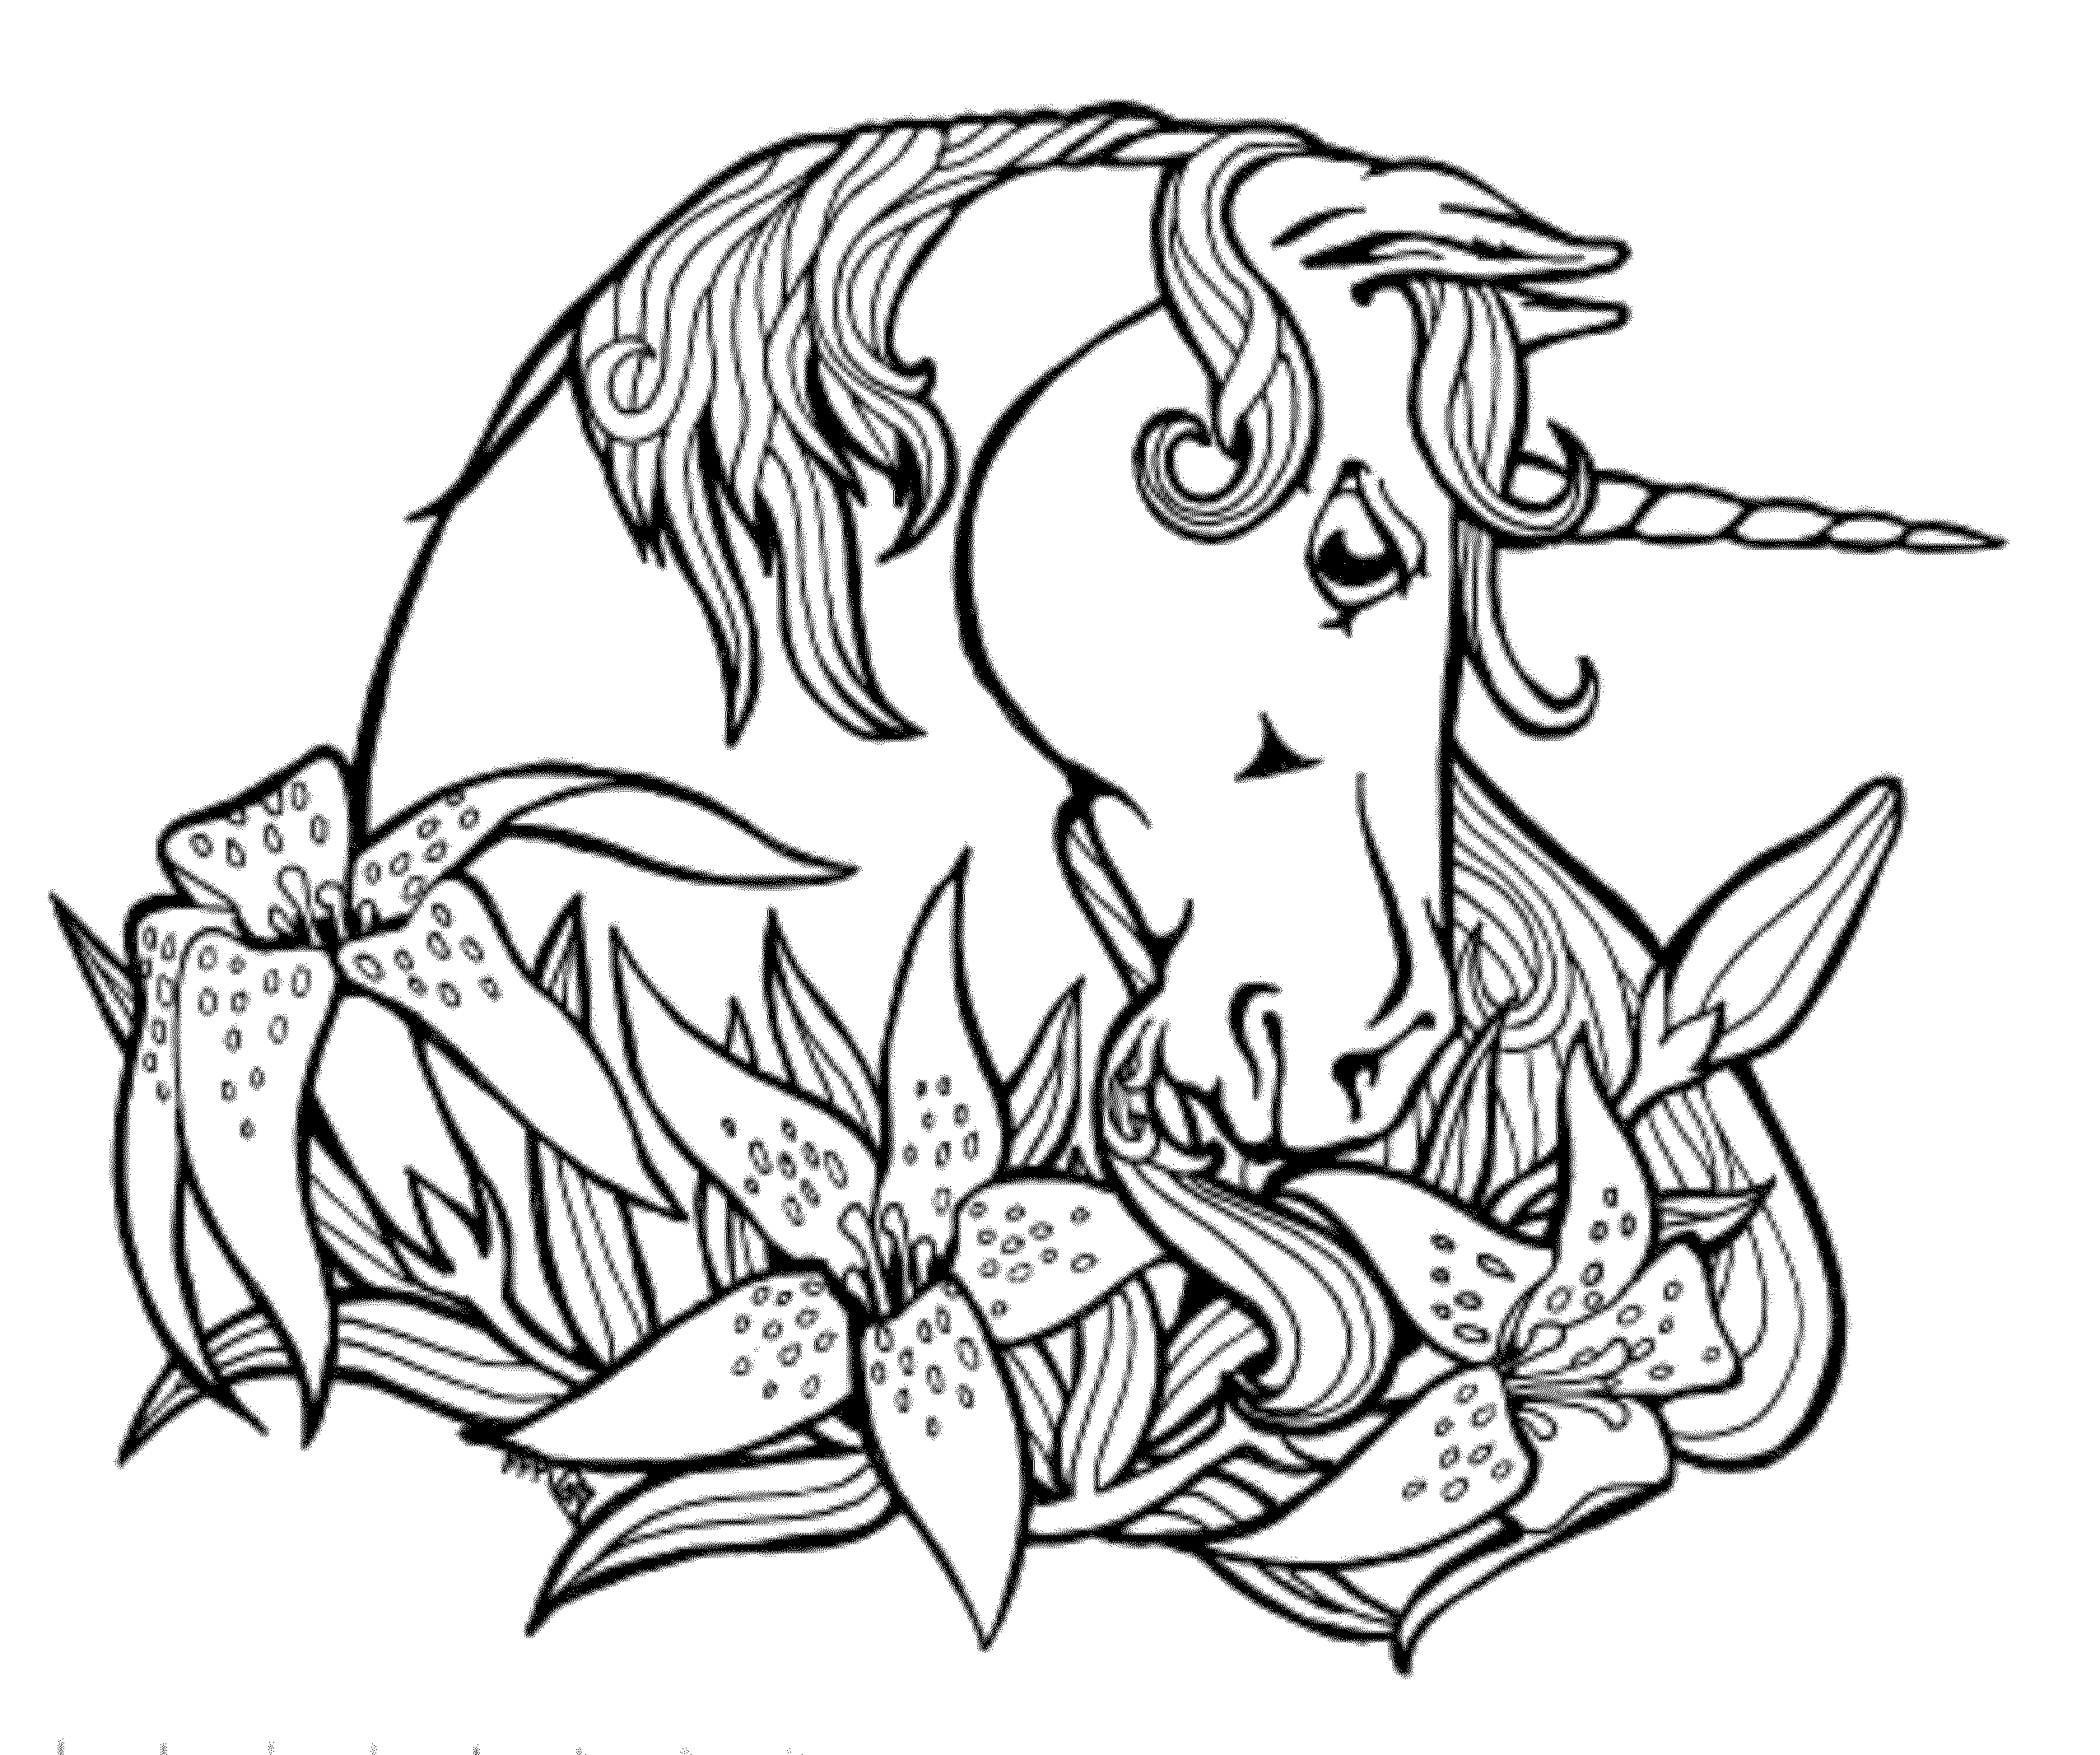 free unicorn pictures to color zizzle zazzle lineart by yampuff on deviantart unicorn pictures unicorn free color to 